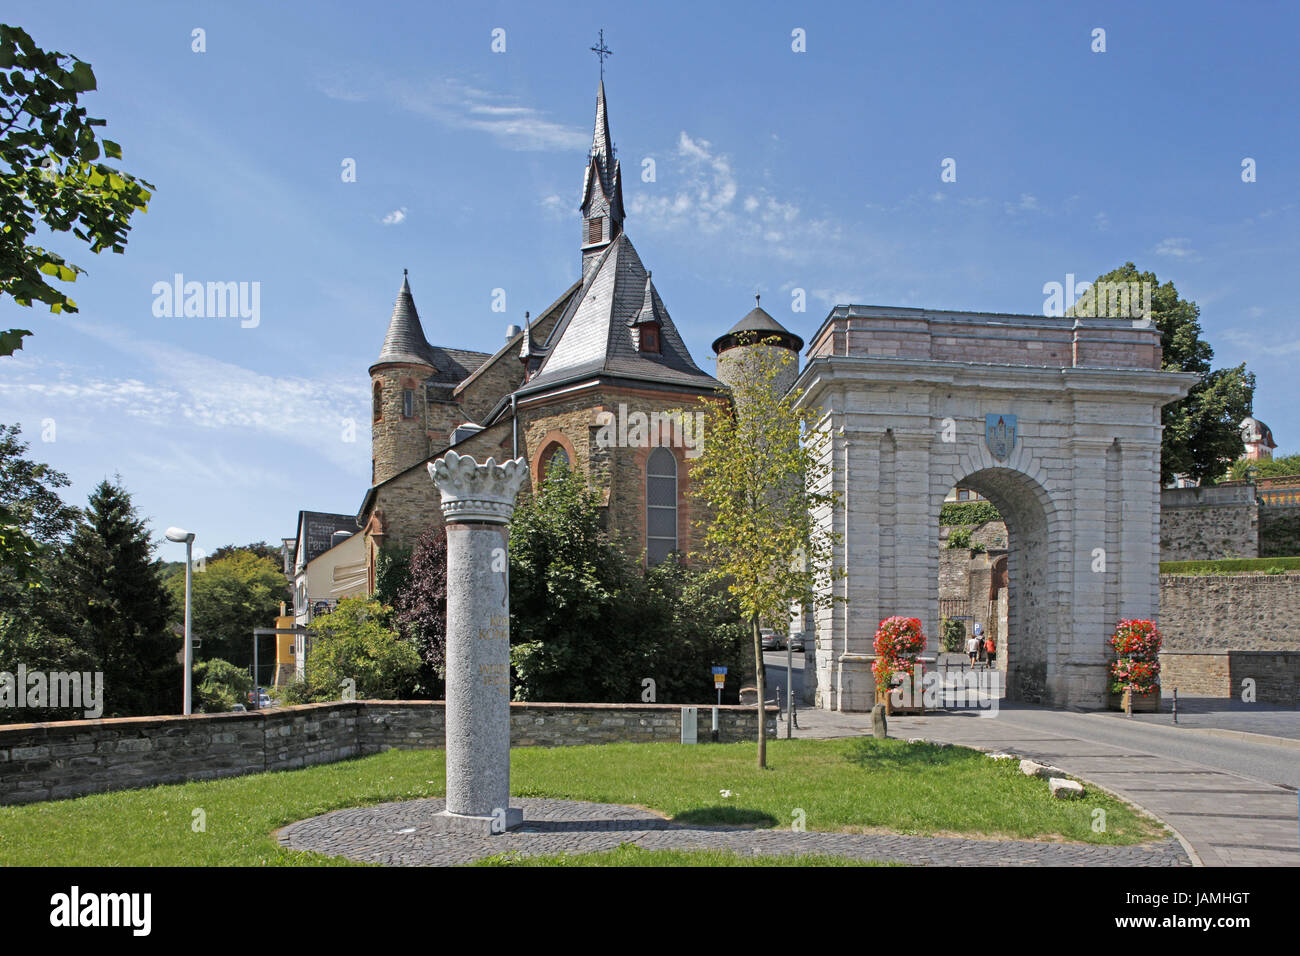 Germany,Hessen,castle Weil in the Lahn,land gate,castle Weil,church,pillar,gate,tourism,places of interest, Stock Photo